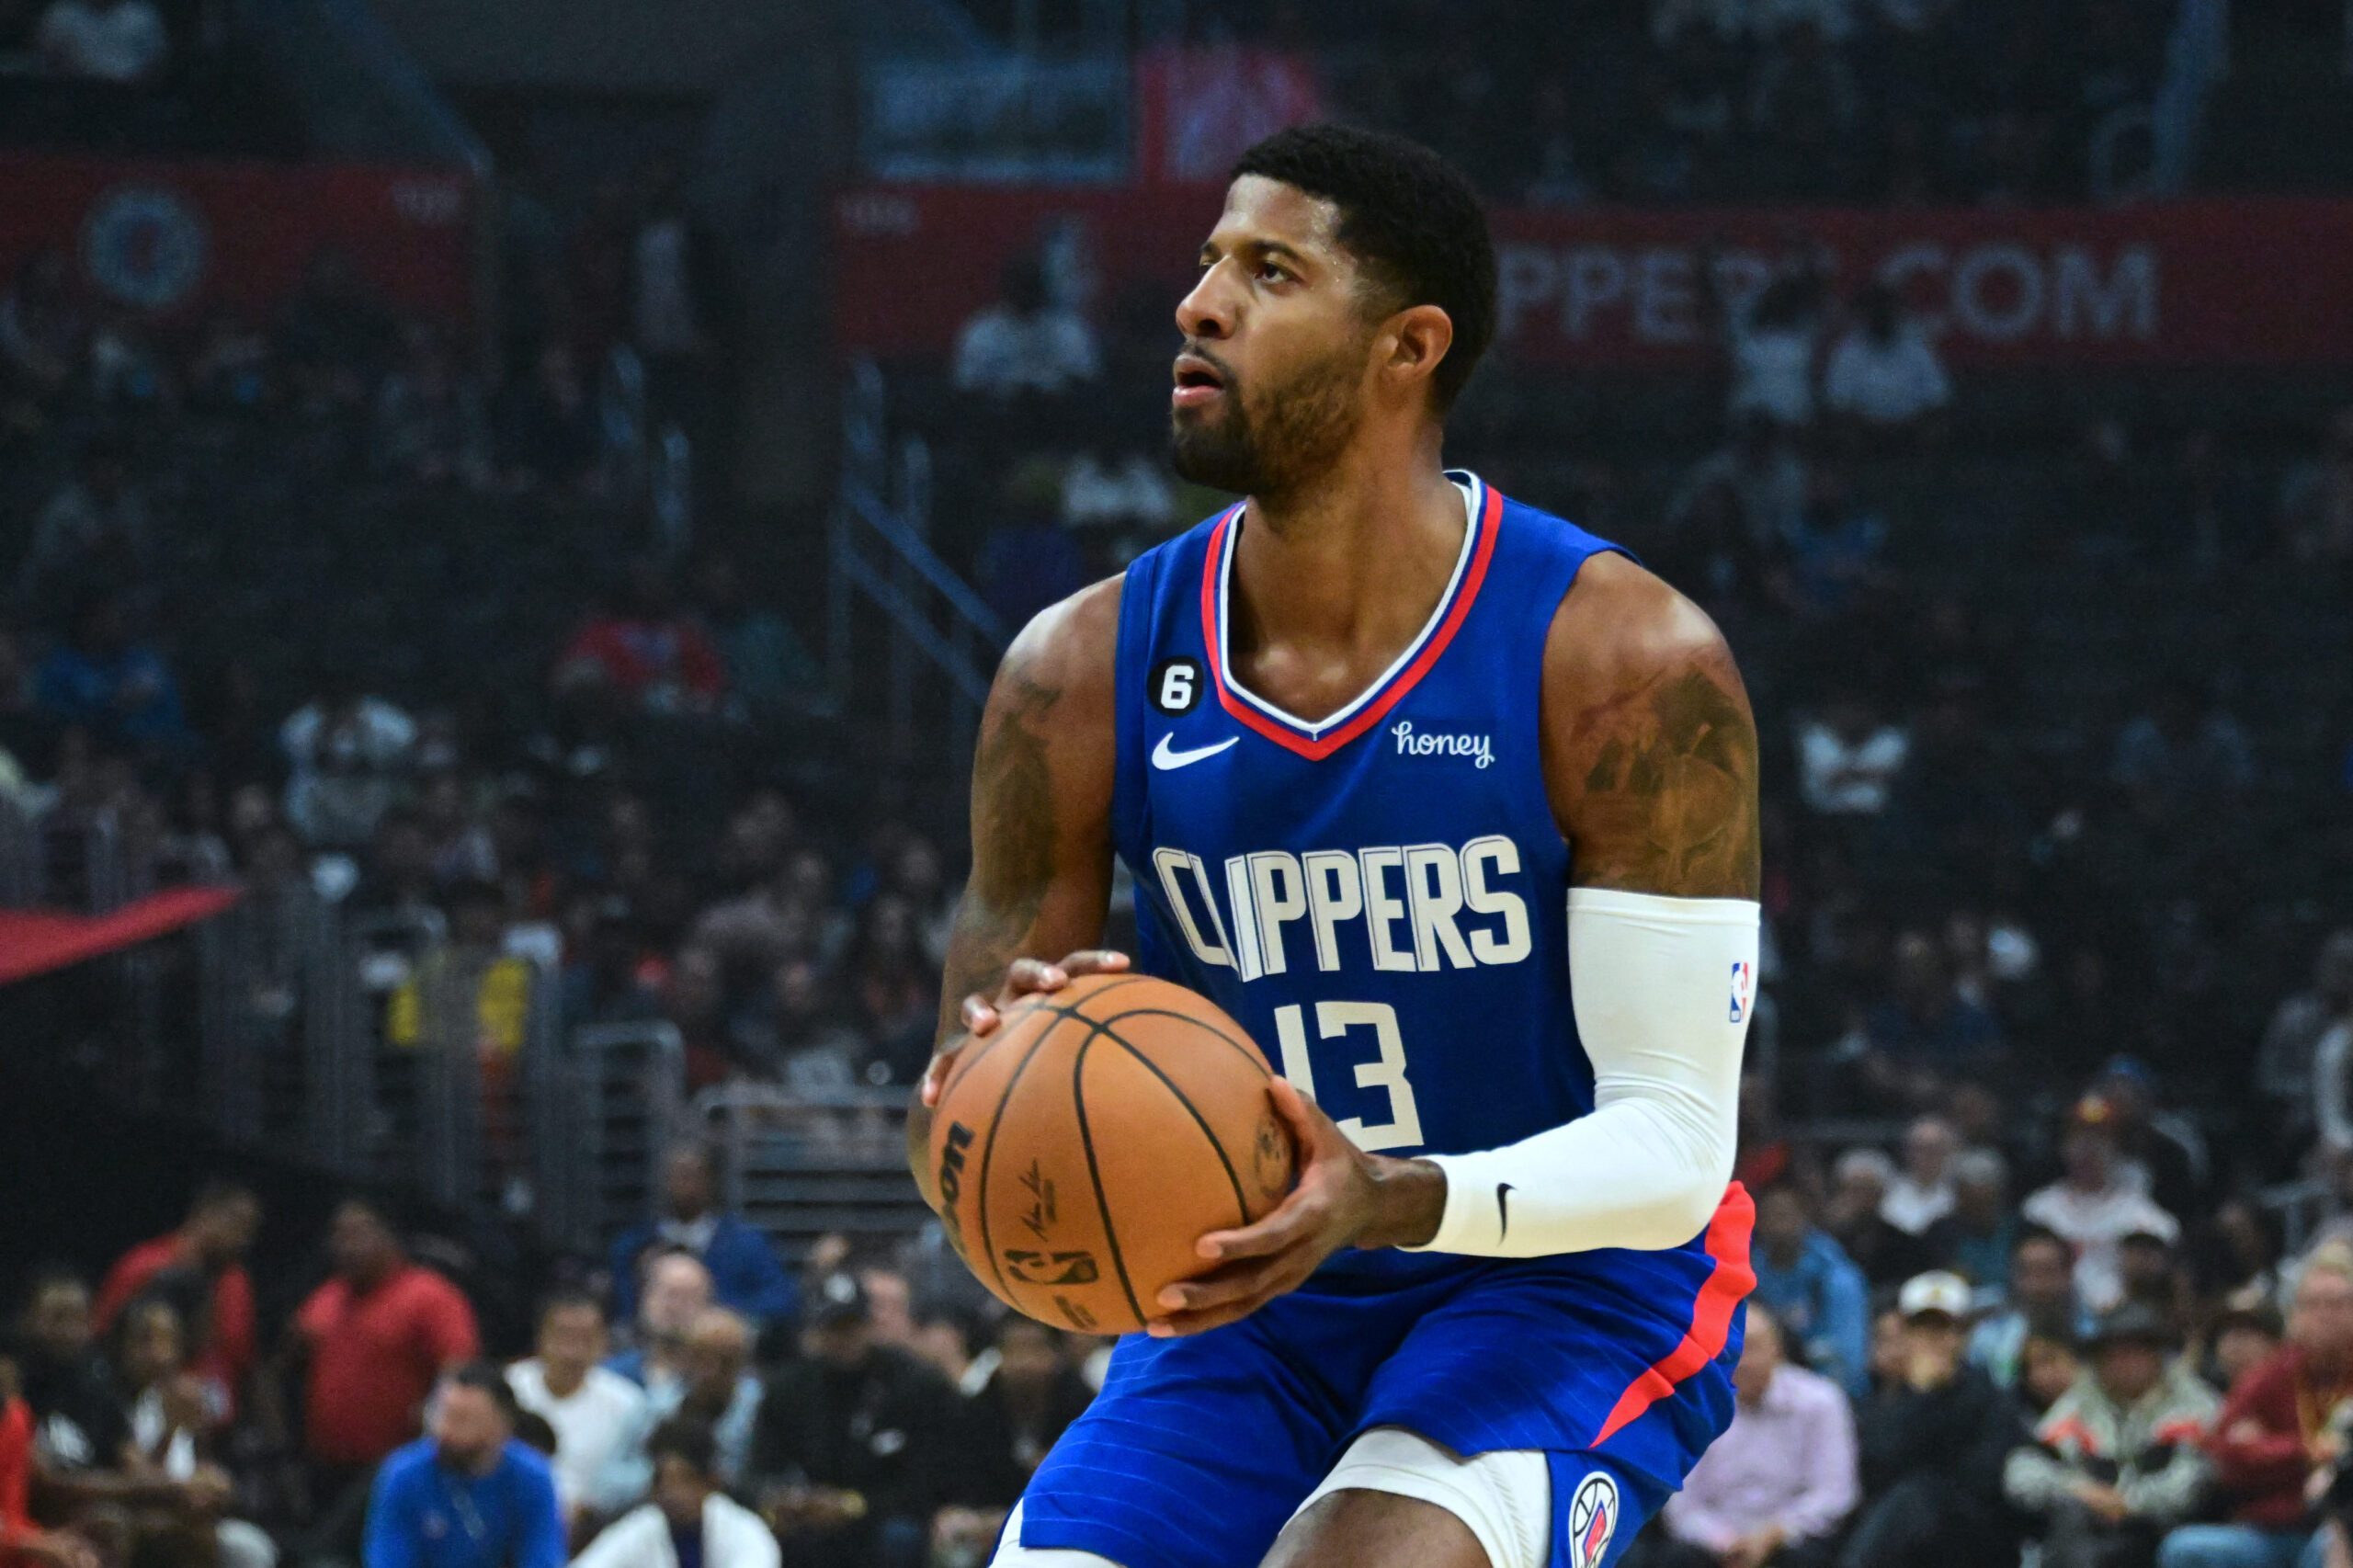 Do-it-all Paul George sinks game-winner as Clippers edge Rockets